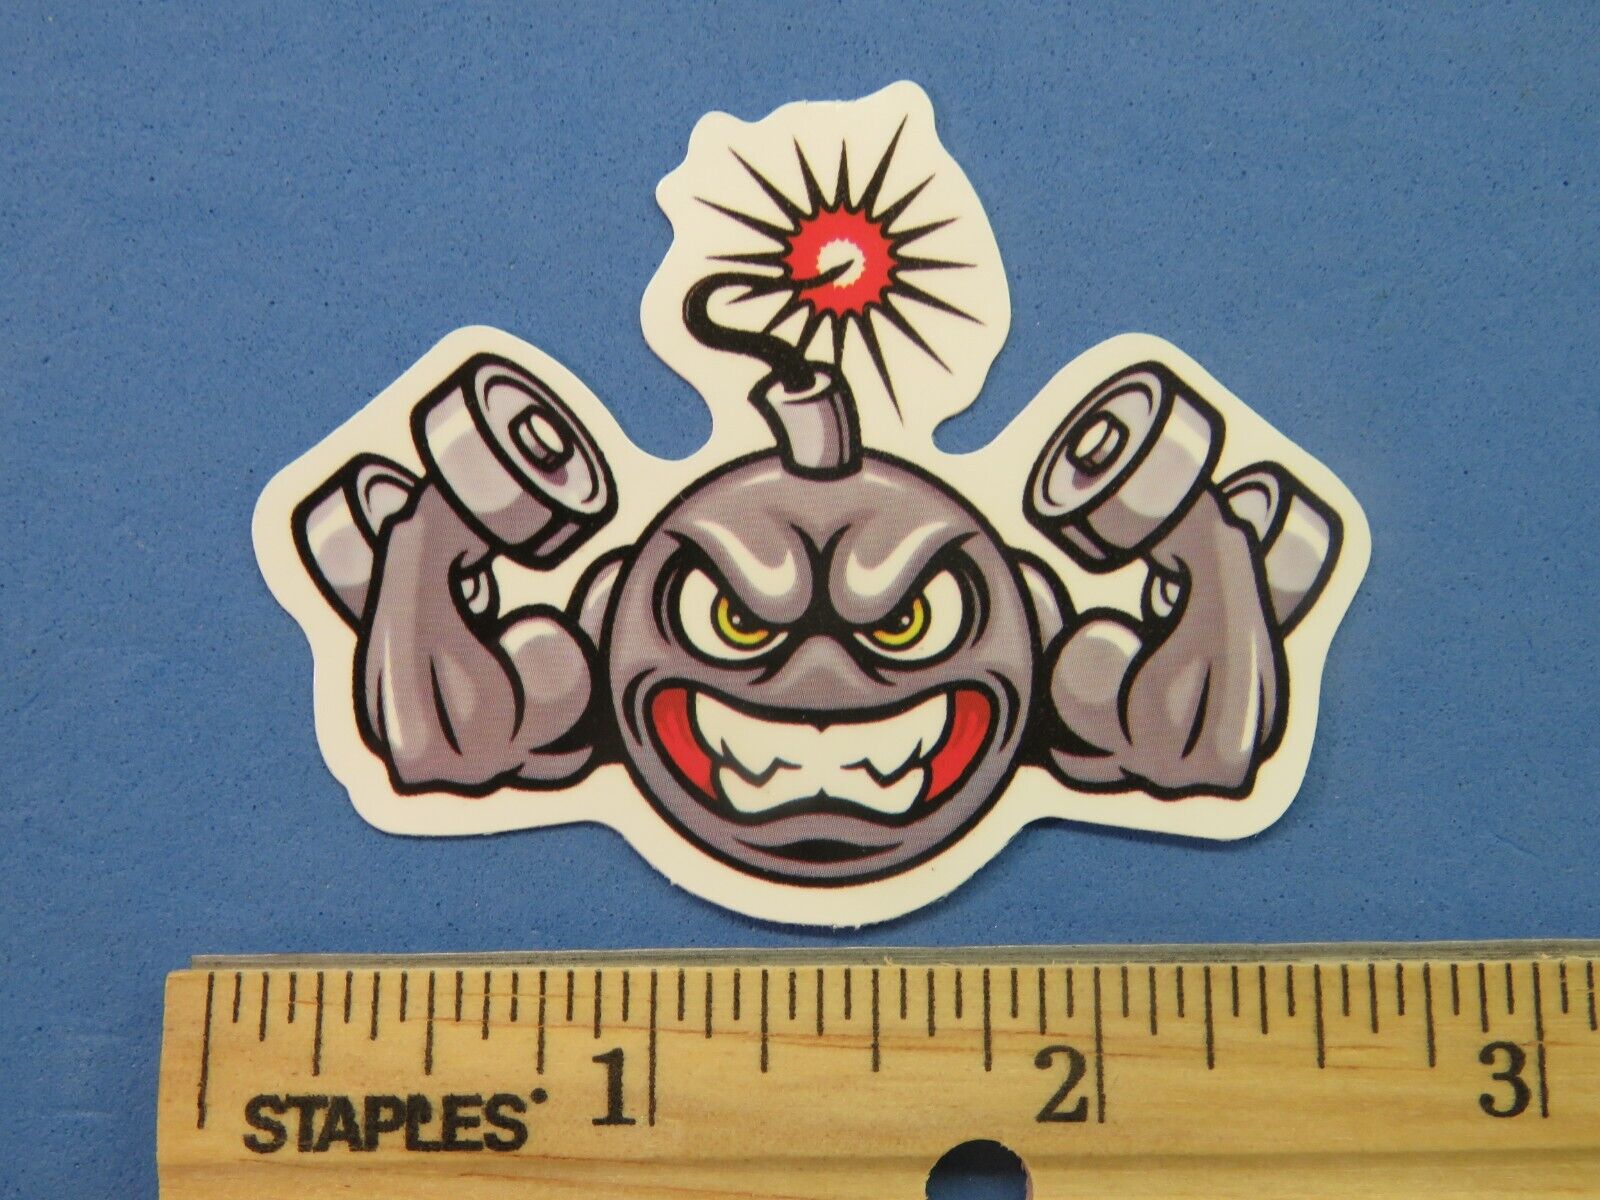 Collectible STICKER ~ Explosive Bomb Face Lifting Weights Design